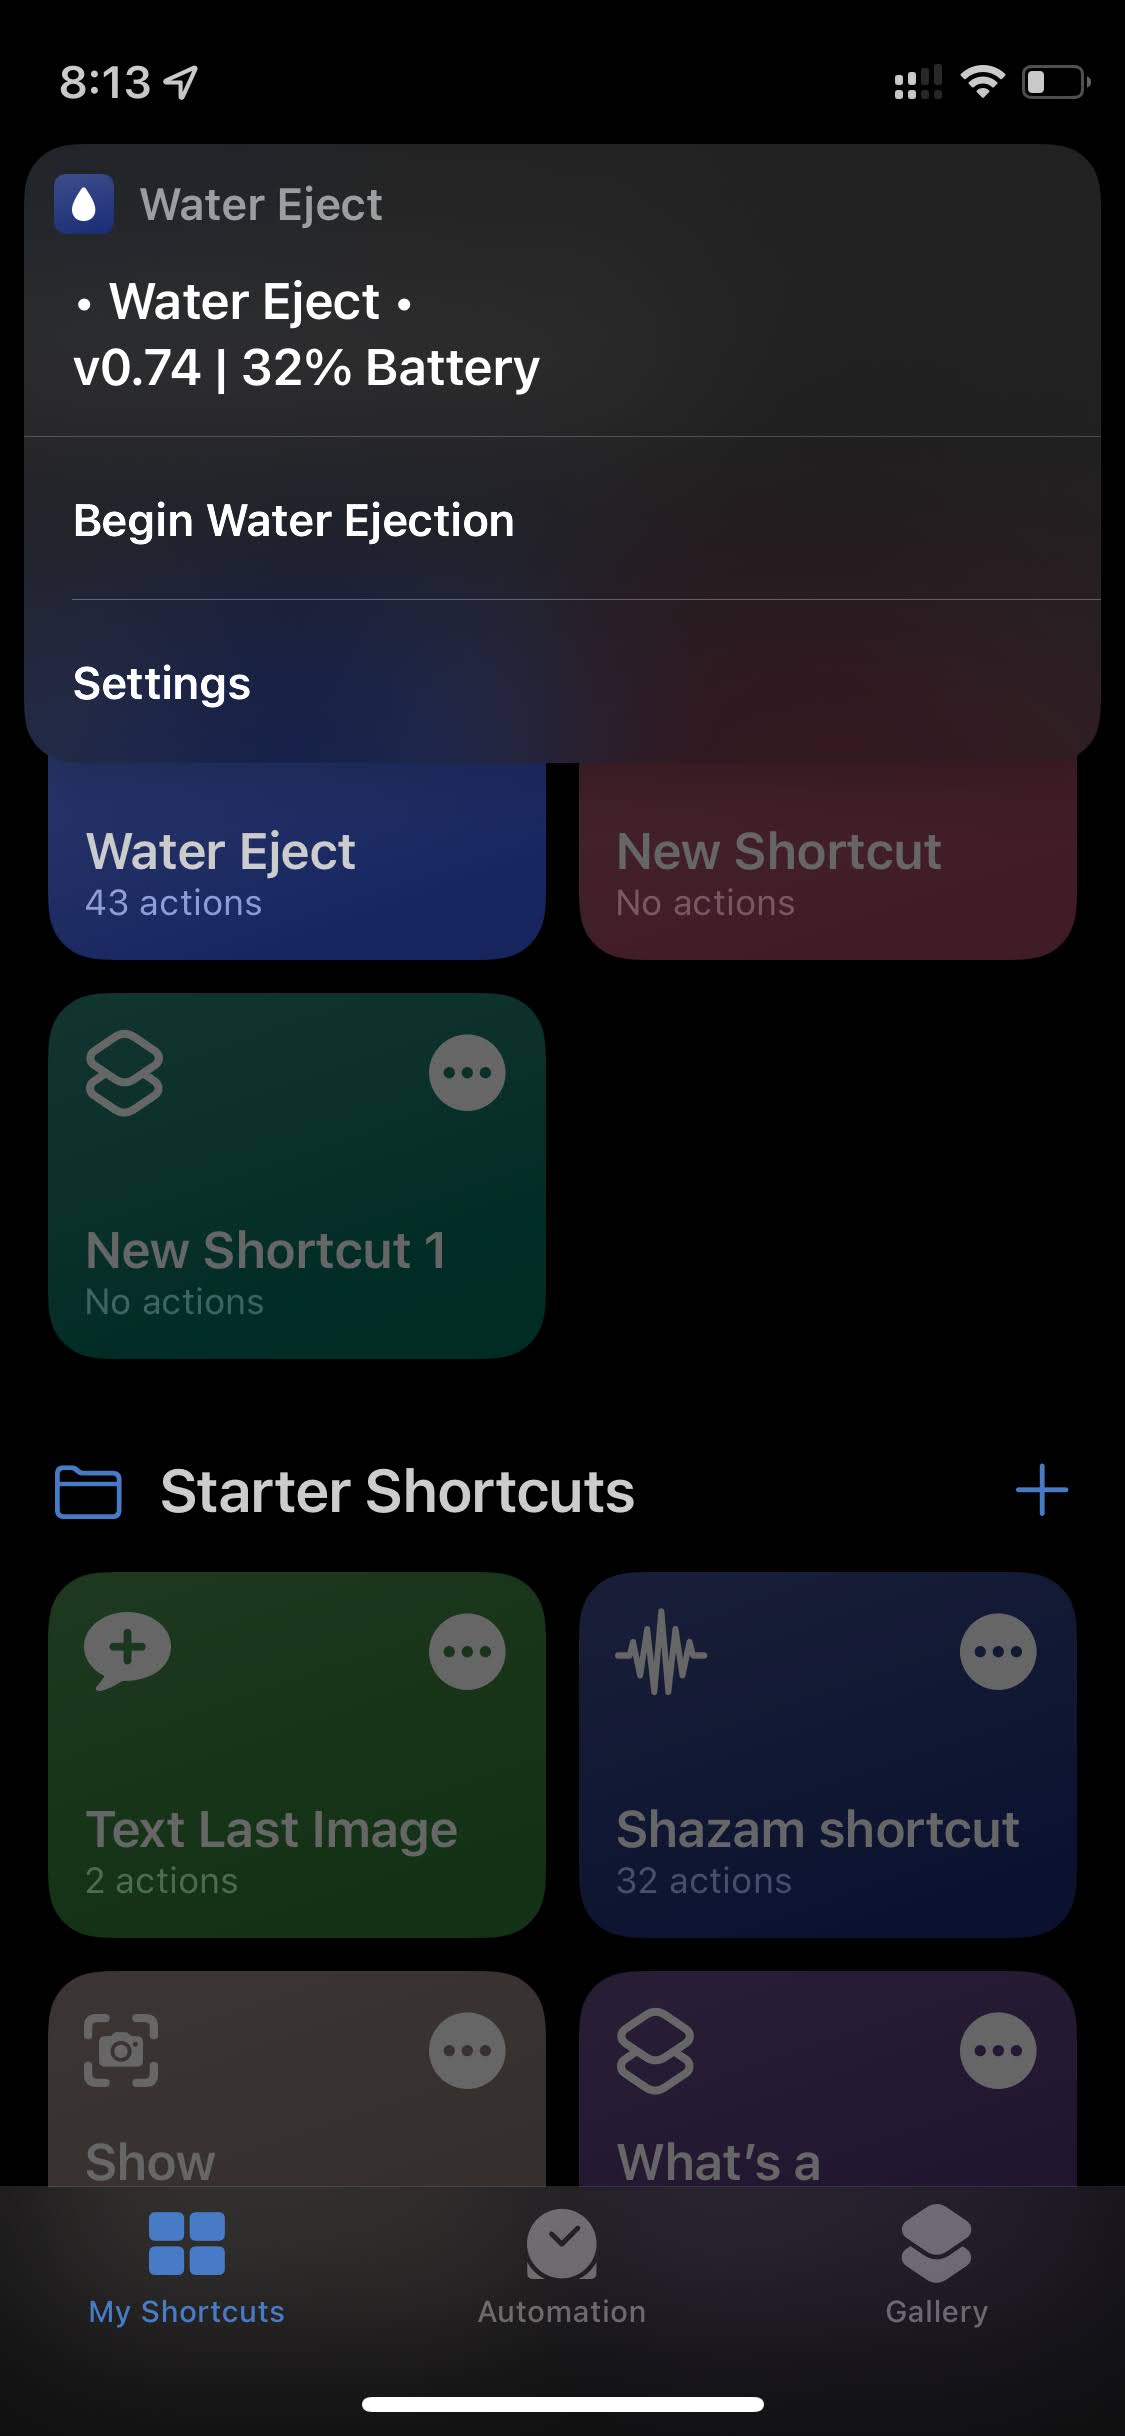 Water Eject Shortcut on iPhone 5